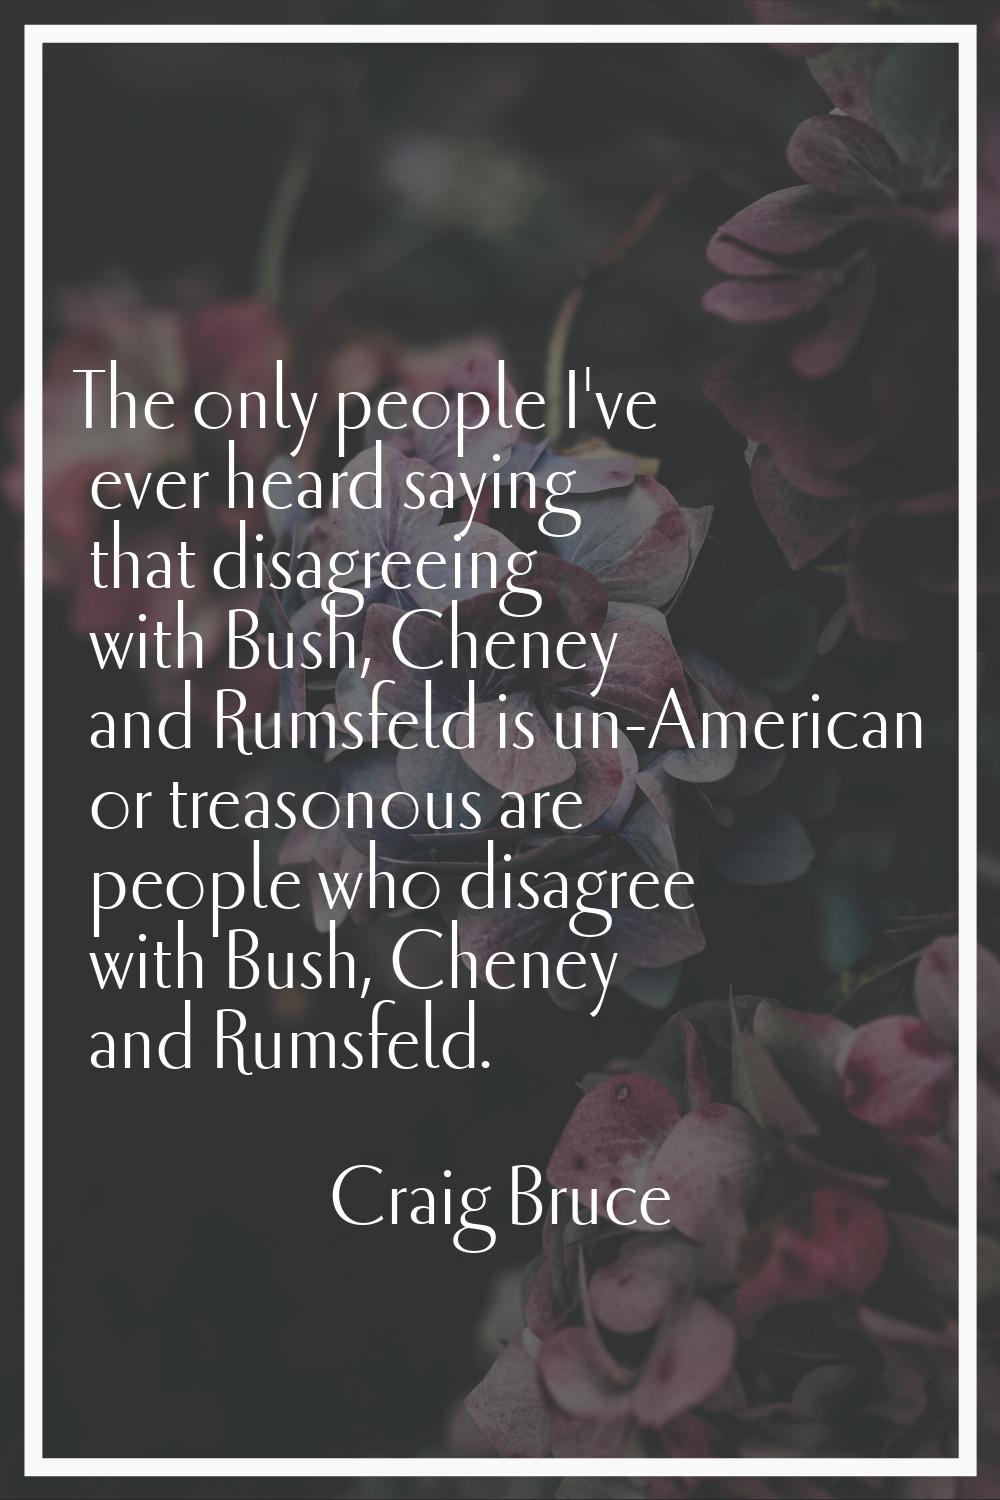 The only people I've ever heard saying that disagreeing with Bush, Cheney and Rumsfeld is un-Americ